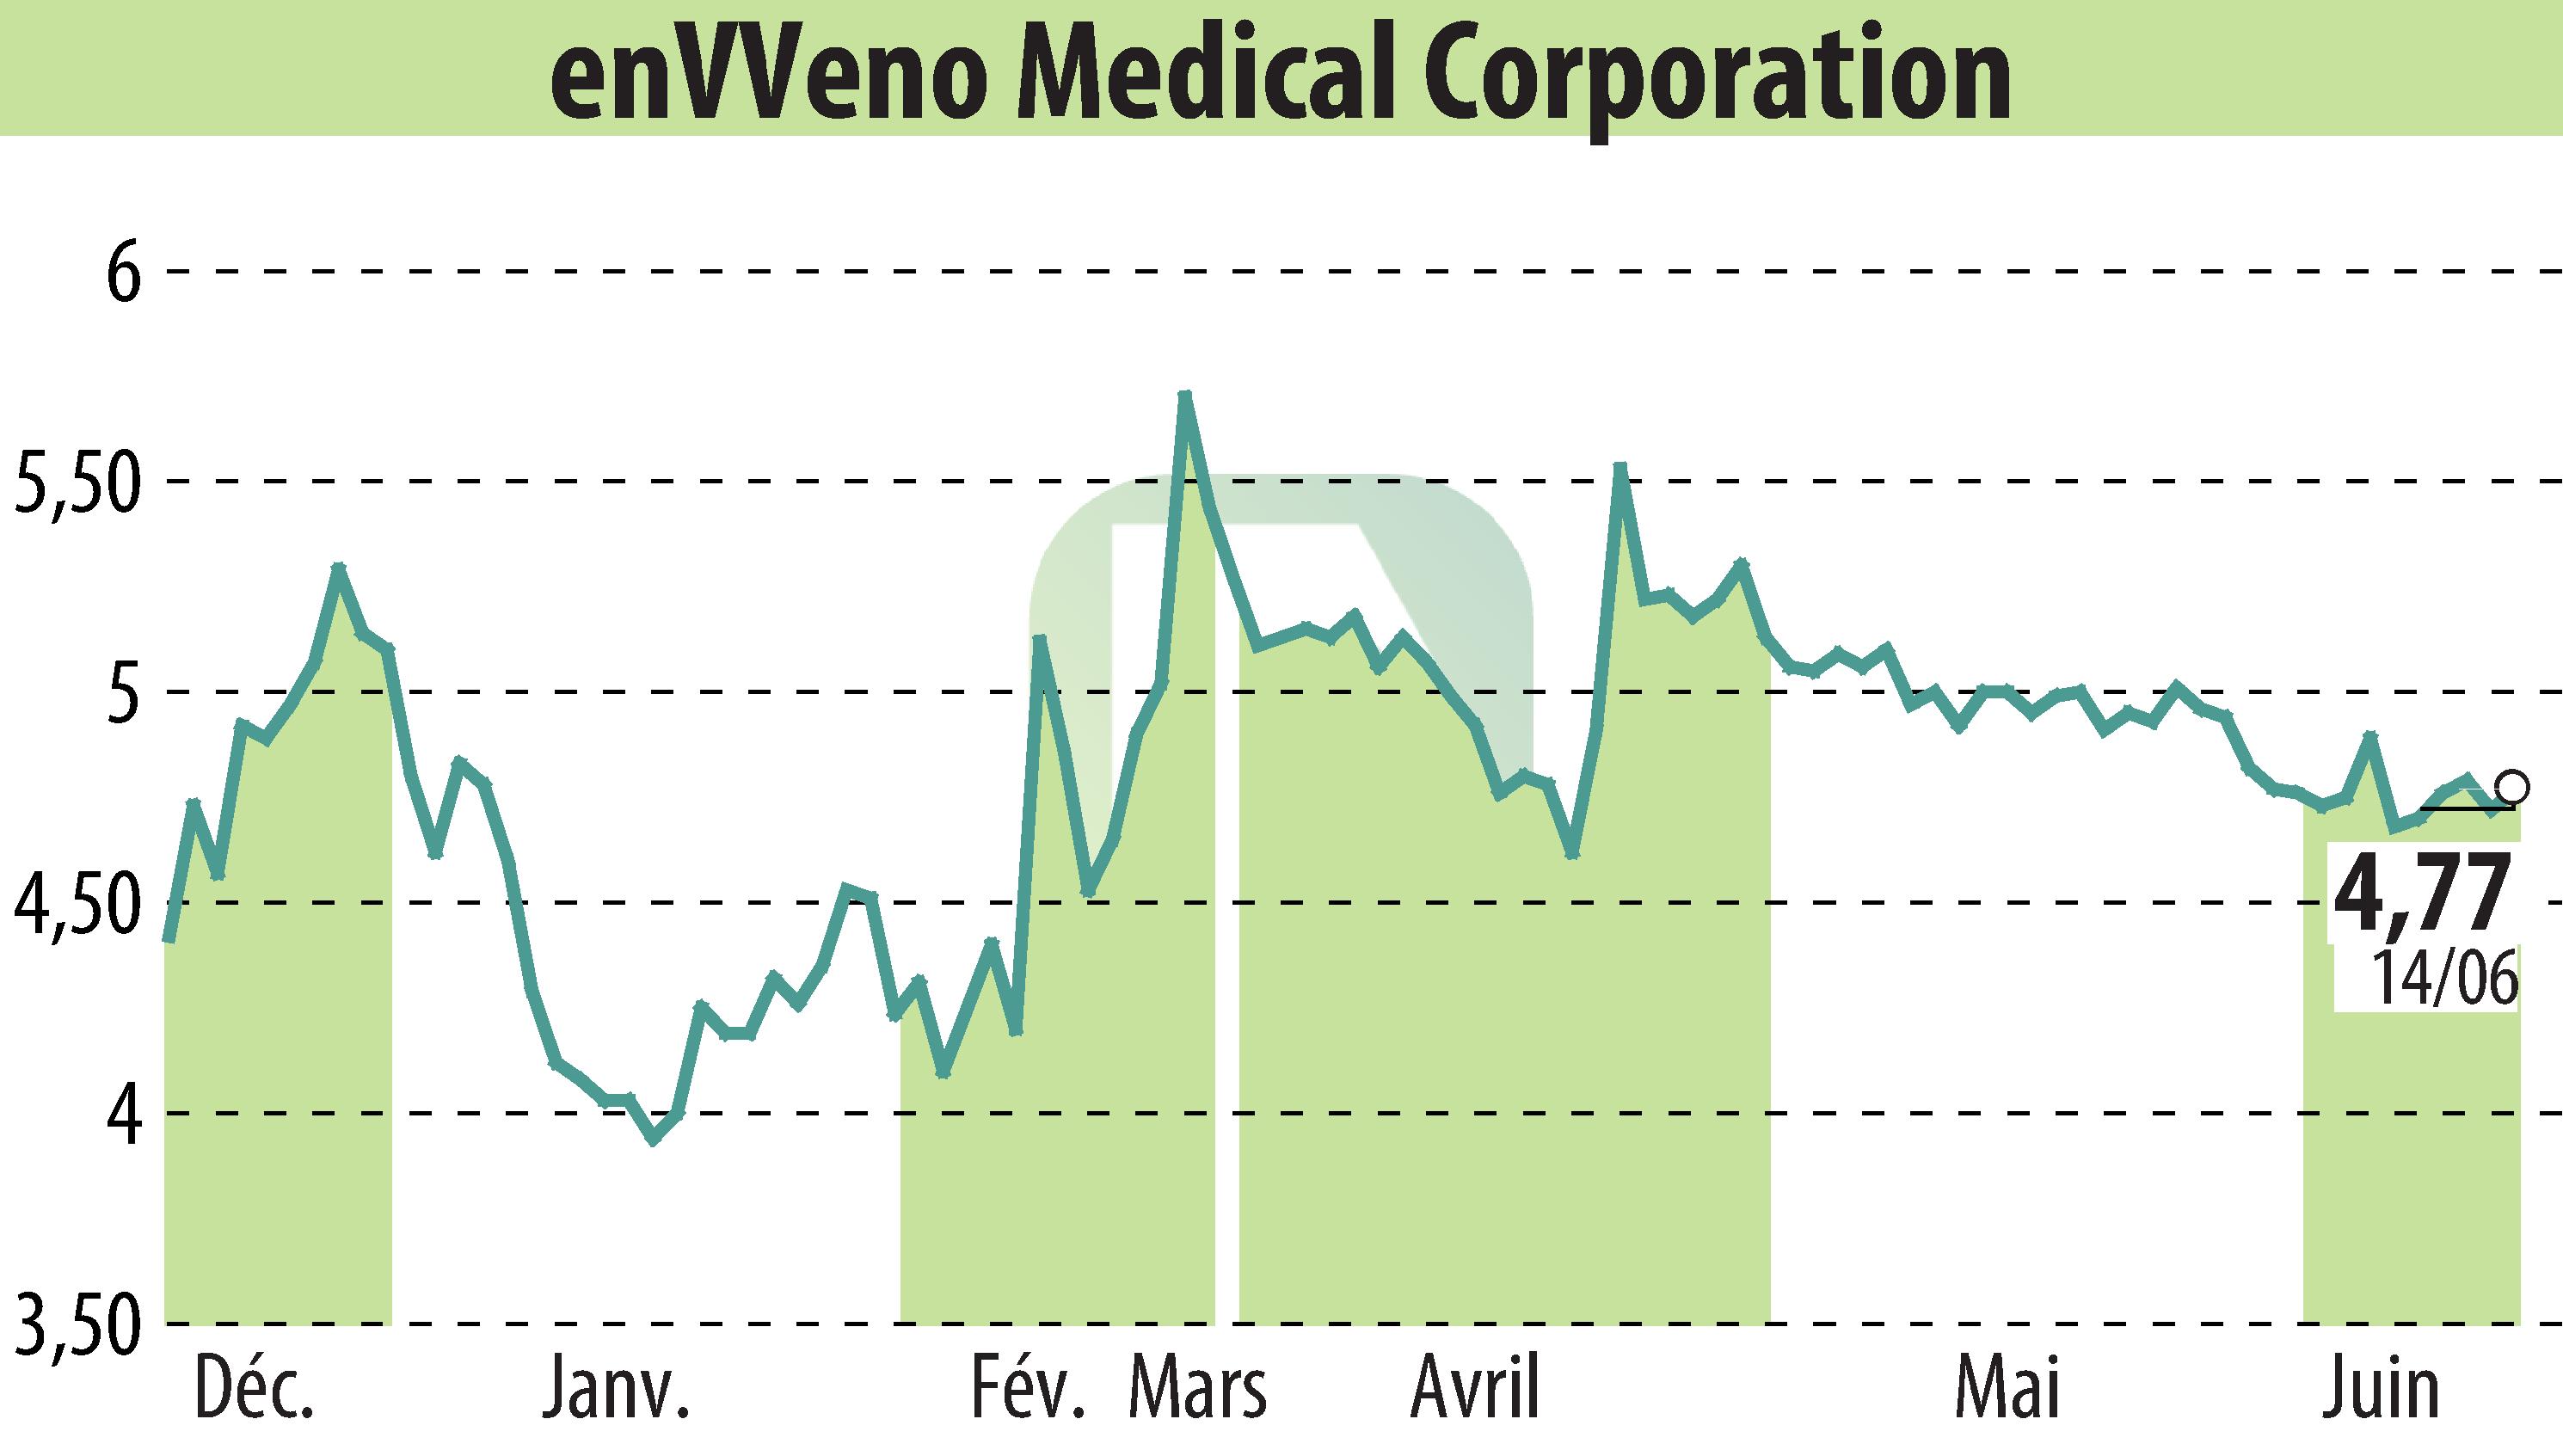 Stock price chart of EnVVeno Medical Corporation (EBR:NVNO) showing fluctuations.